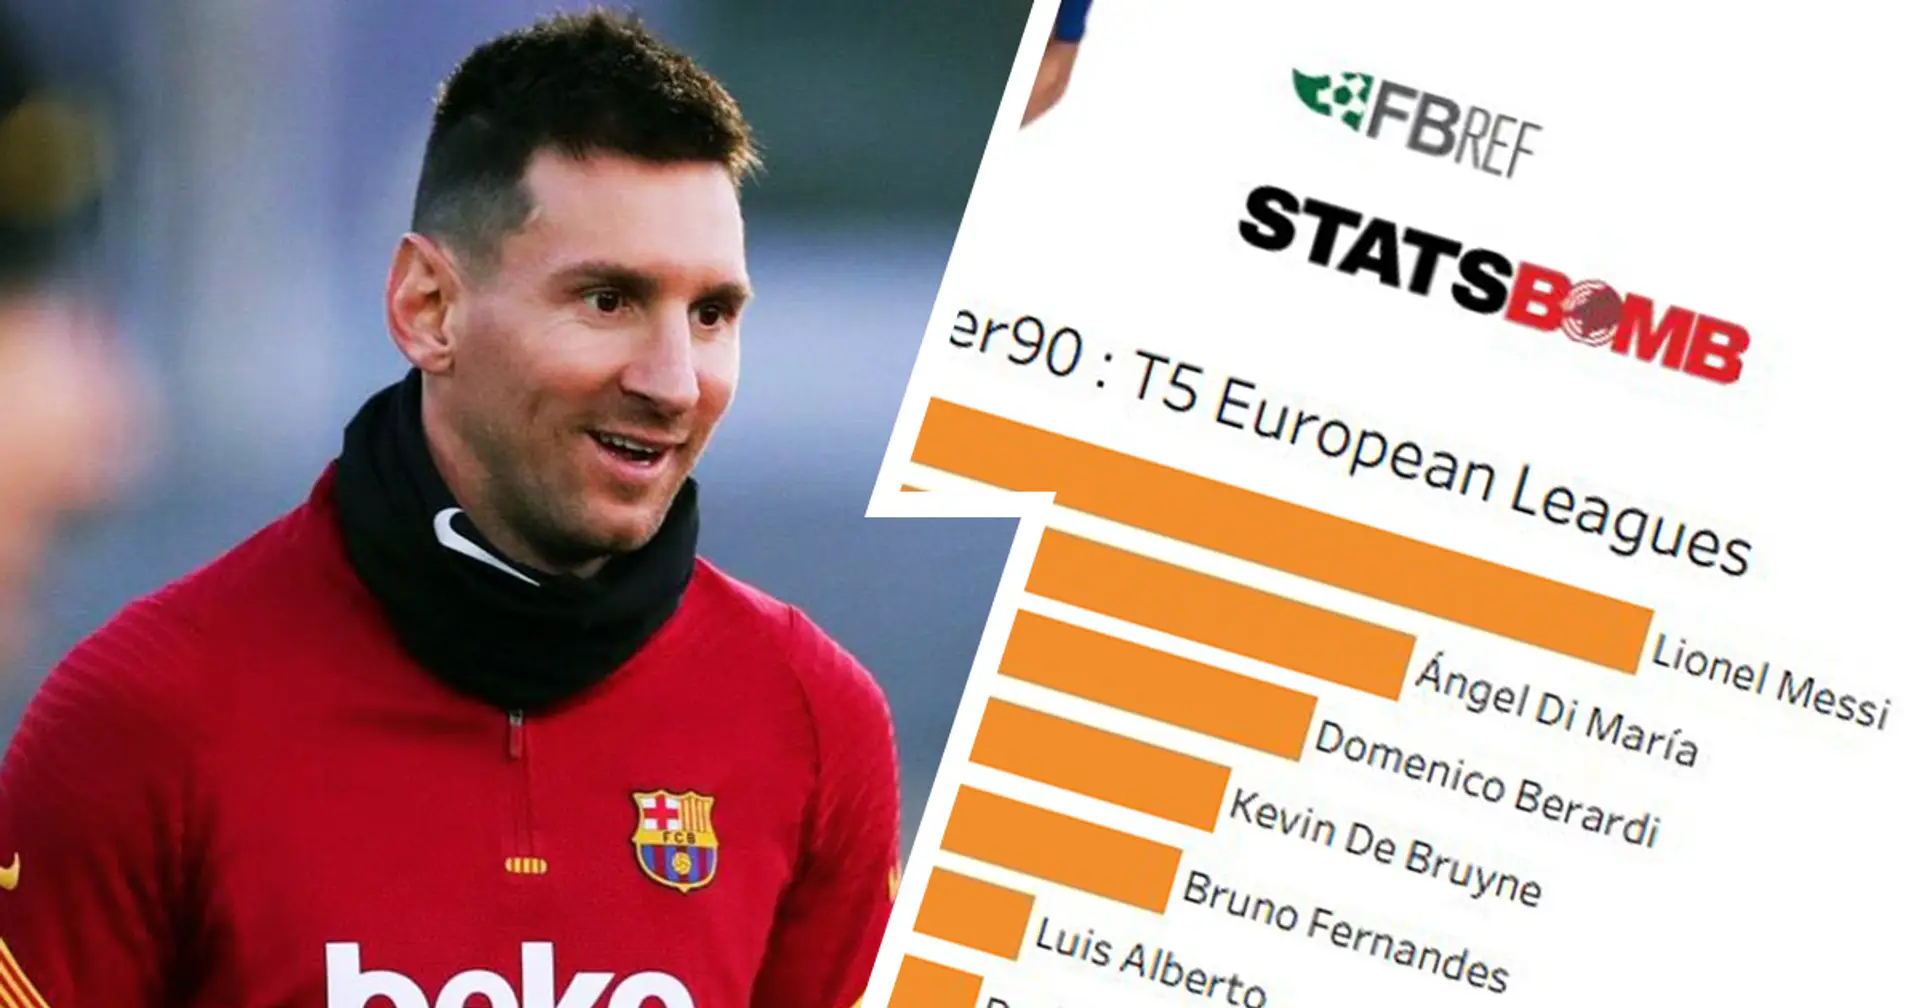 World's best creator: Messi leads way in 3 playmaking stats in Europe's top 5 leagues in 2020/21